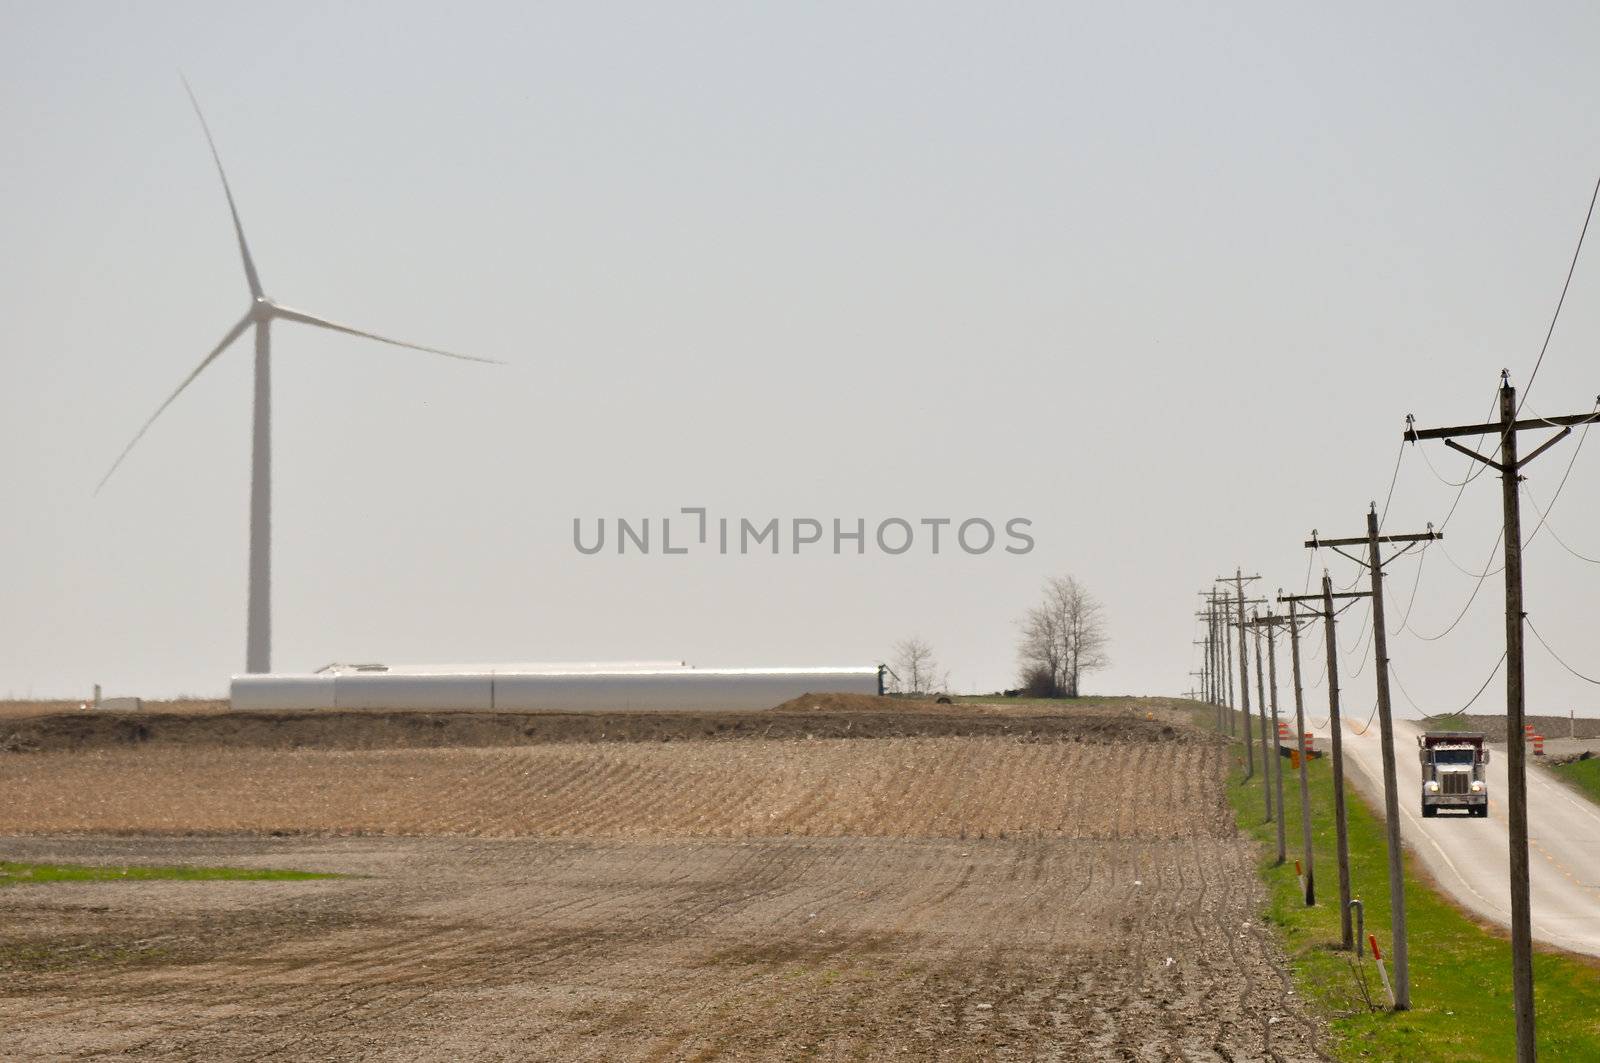 Truck rolls while turbine spins by RefocusPhoto